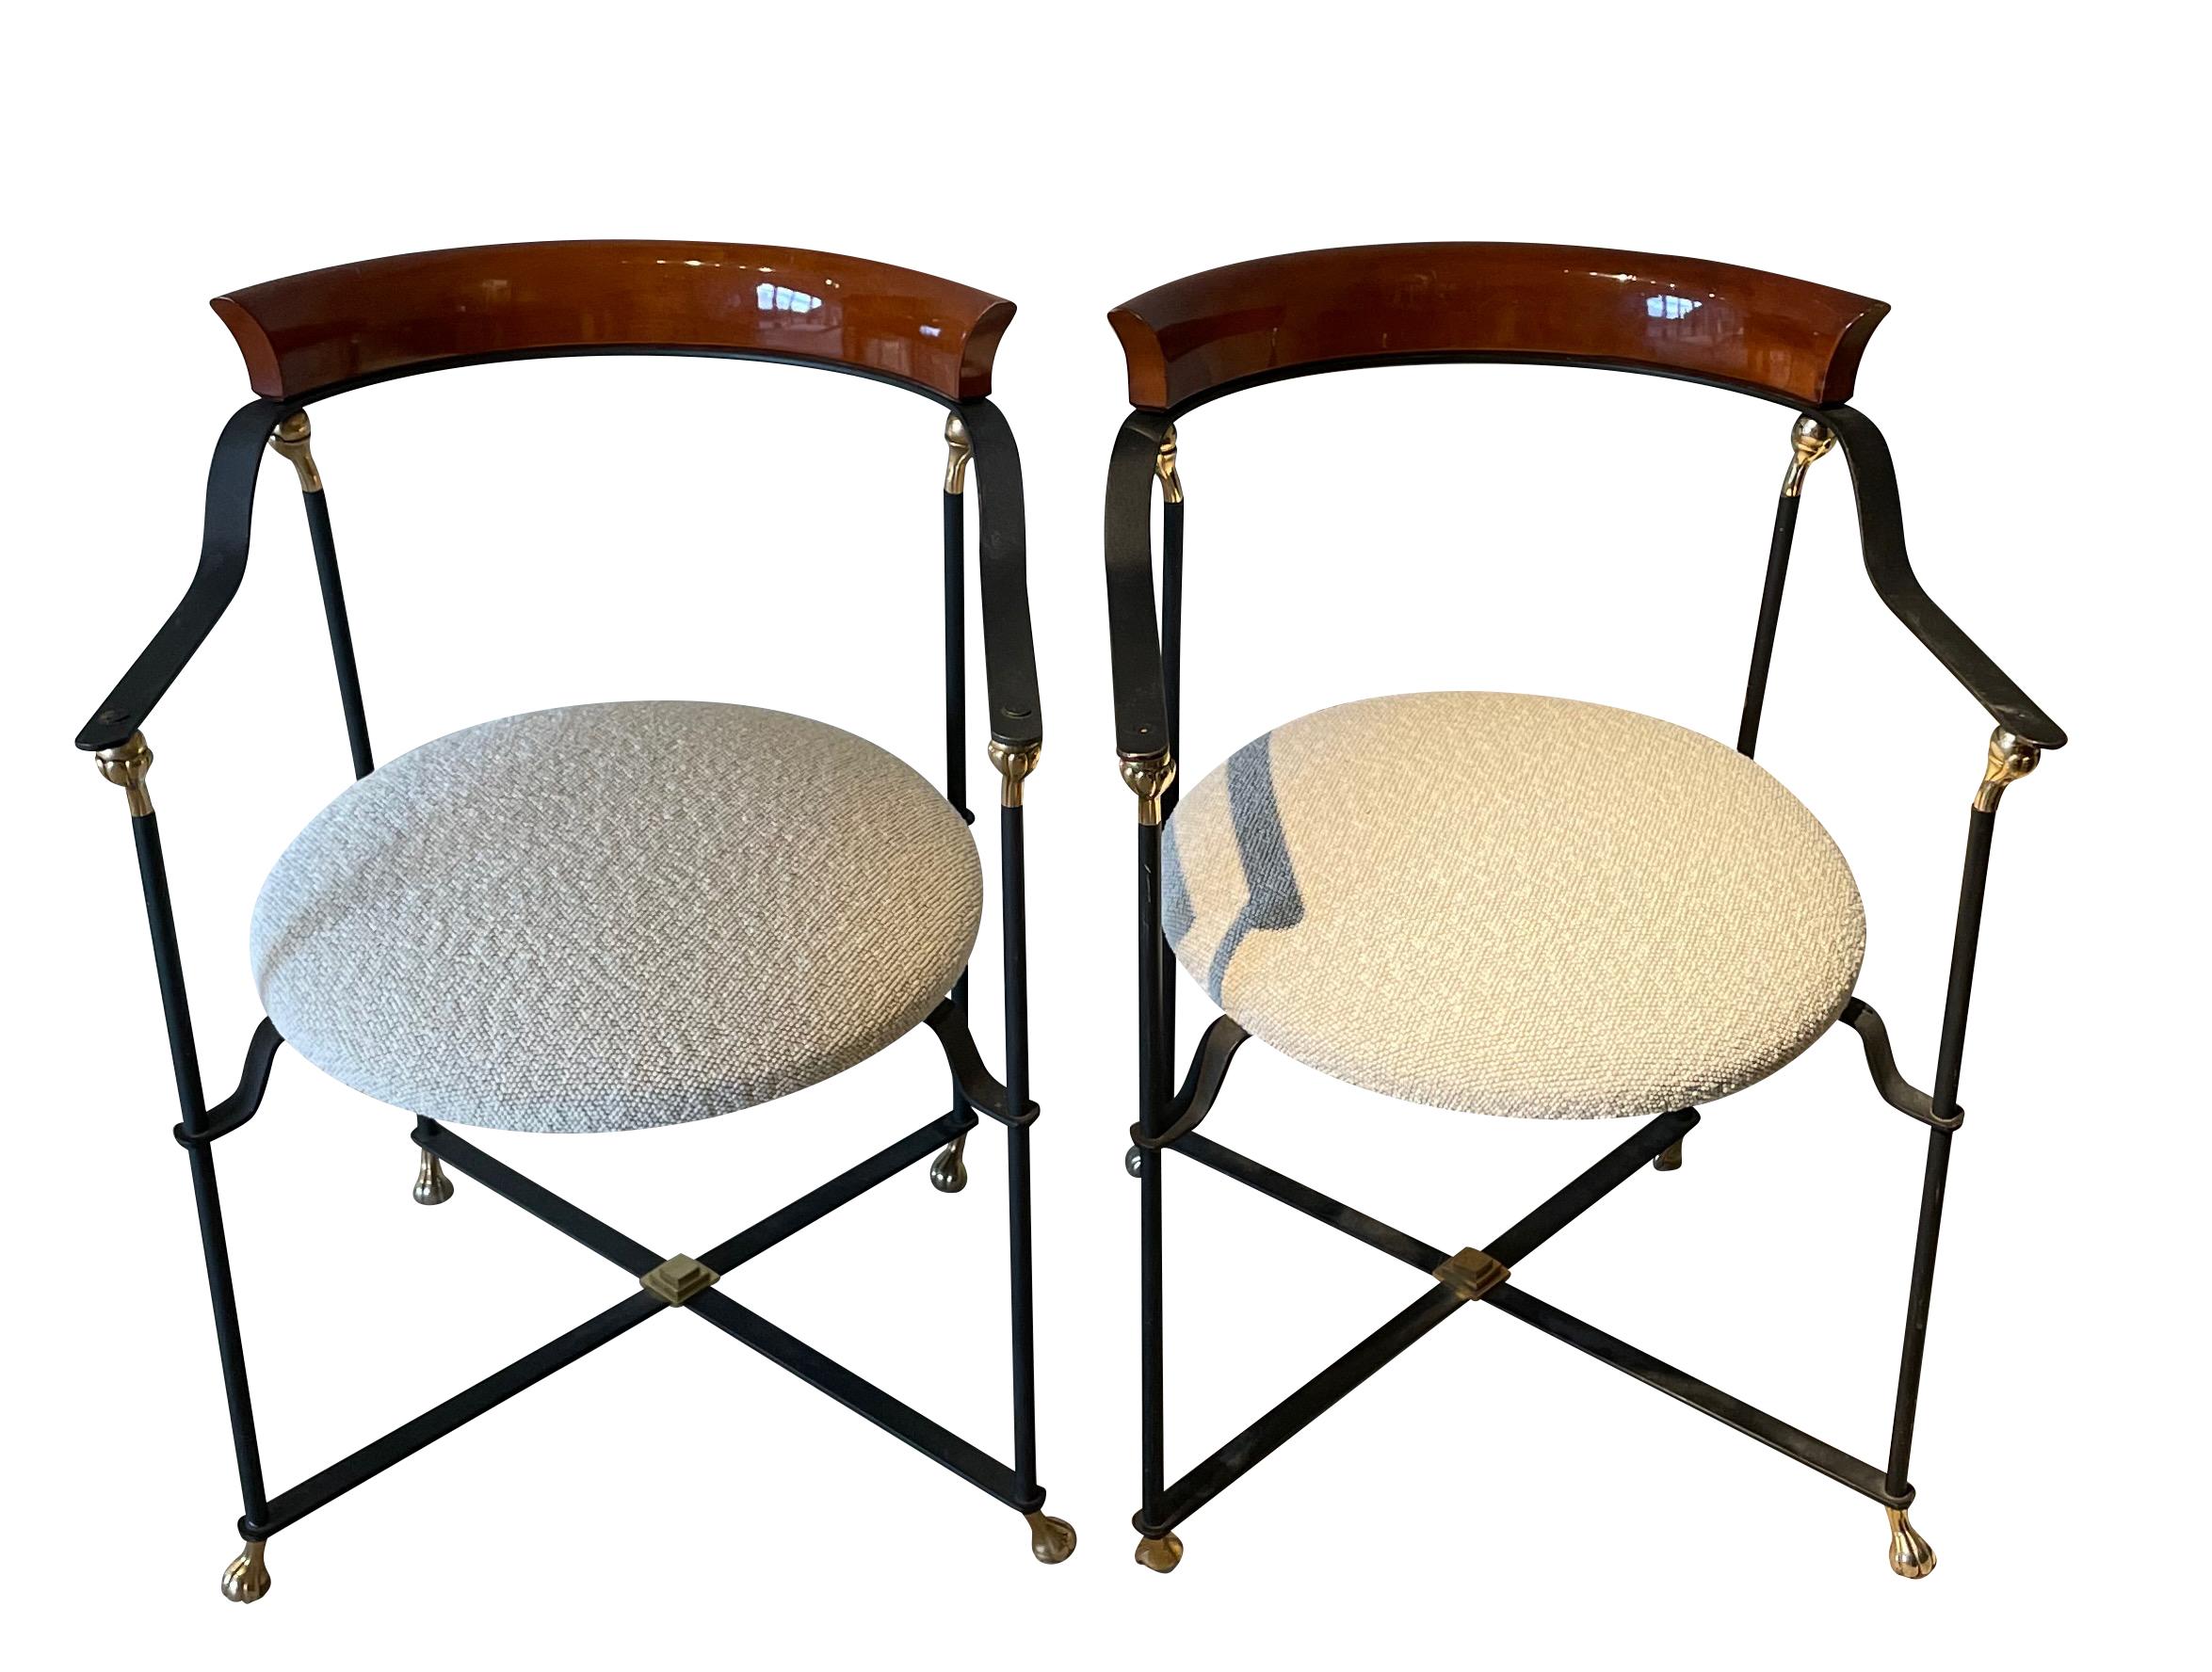 1970's French pair black metal framed chairs with curved polished palissndre back support.
Decorative brass accents.
X base stretcher.
Seat recently reupholstered in boucle fabric.
Can be used as dining or pull up chairs.
Arm height 24